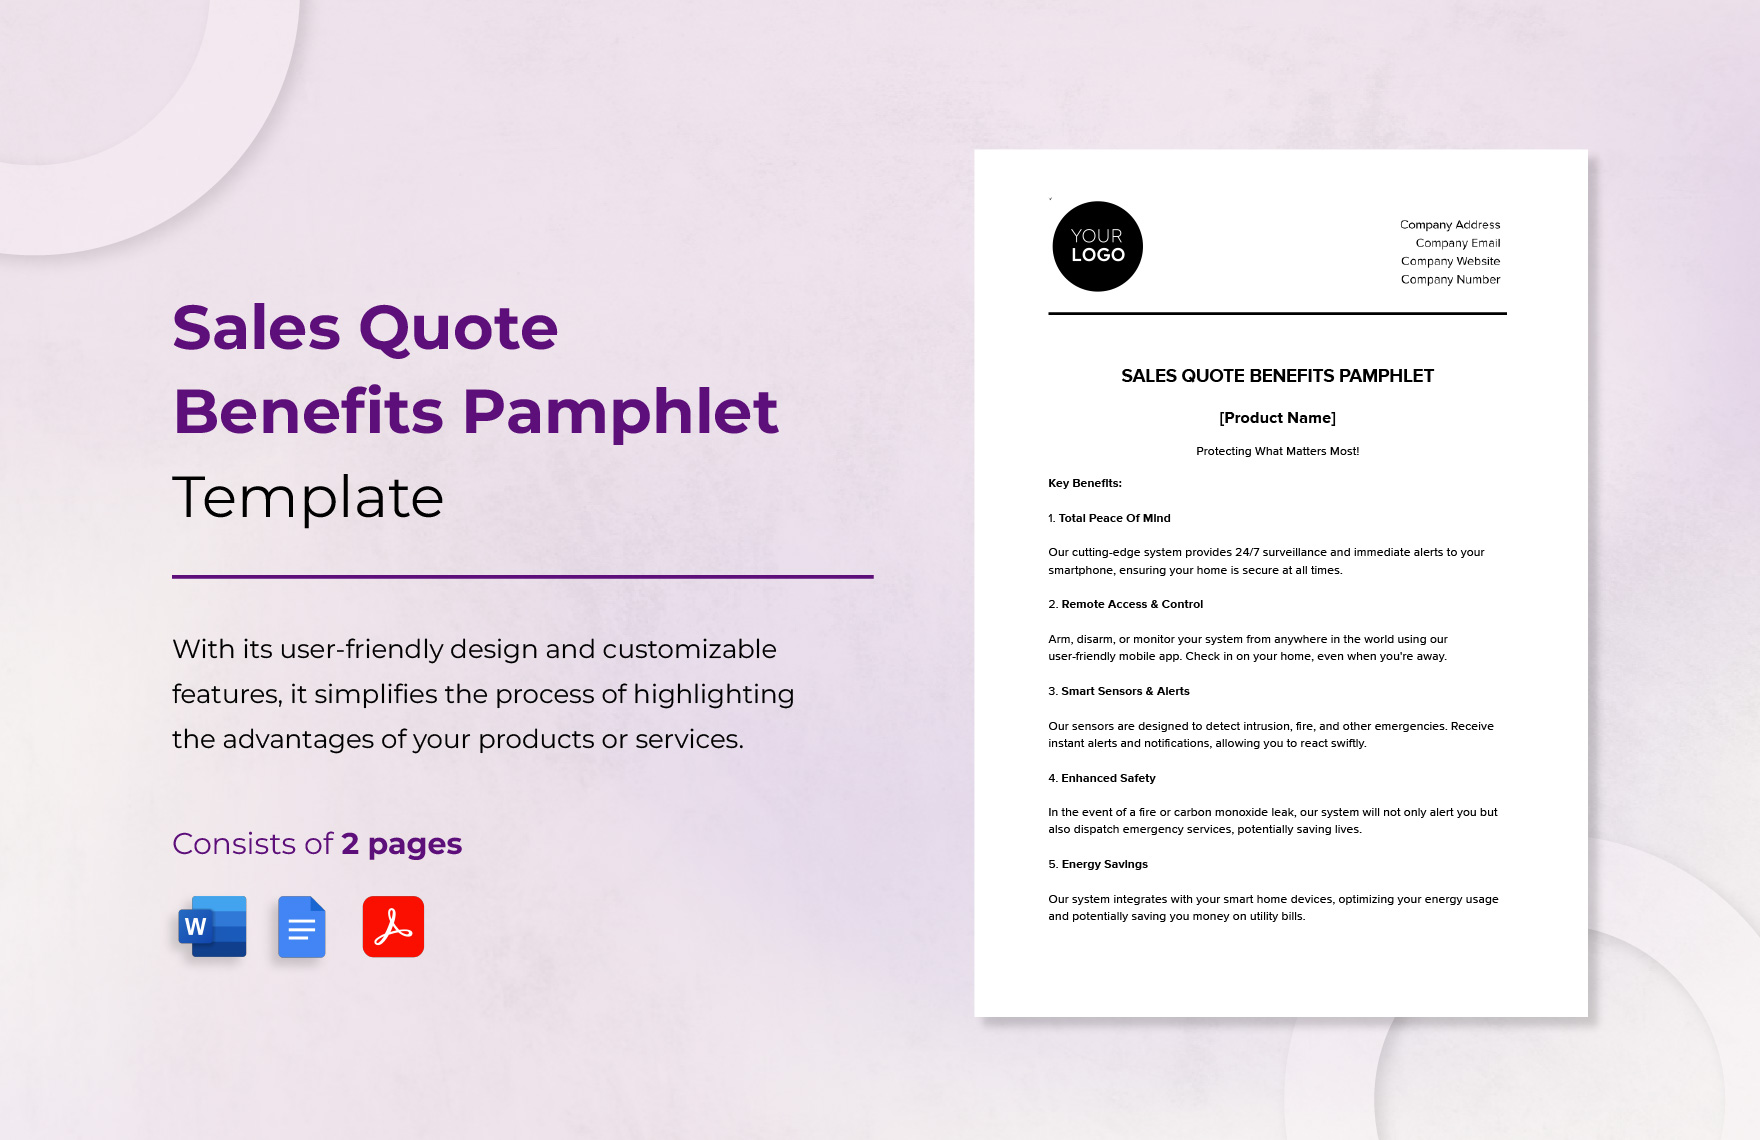 Sales Quote Benefits Pamphlet Template